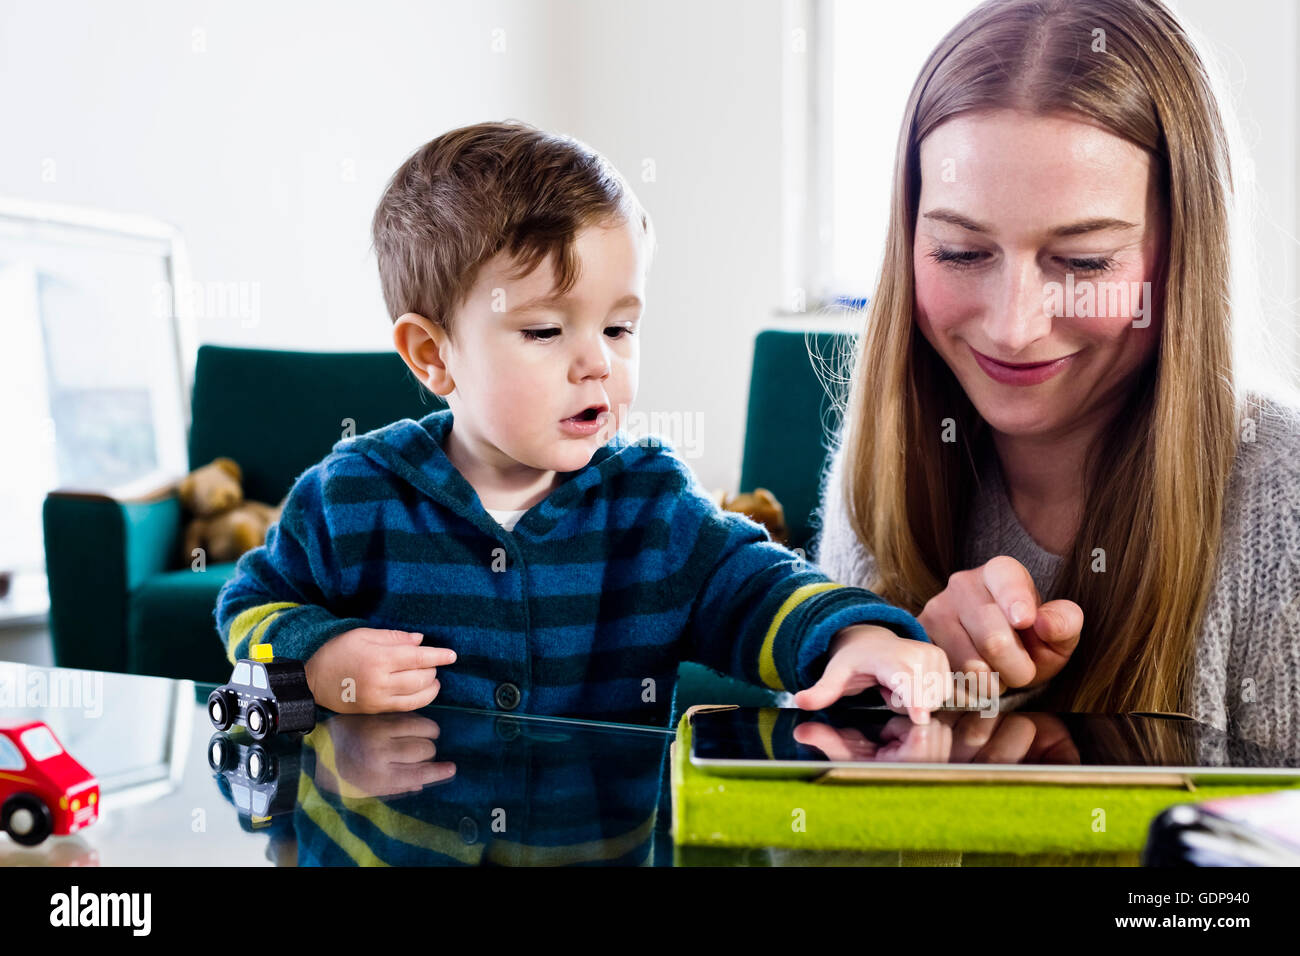 Mid adult woman and baby son using touchscreen on digital tablet at table Stock Photo